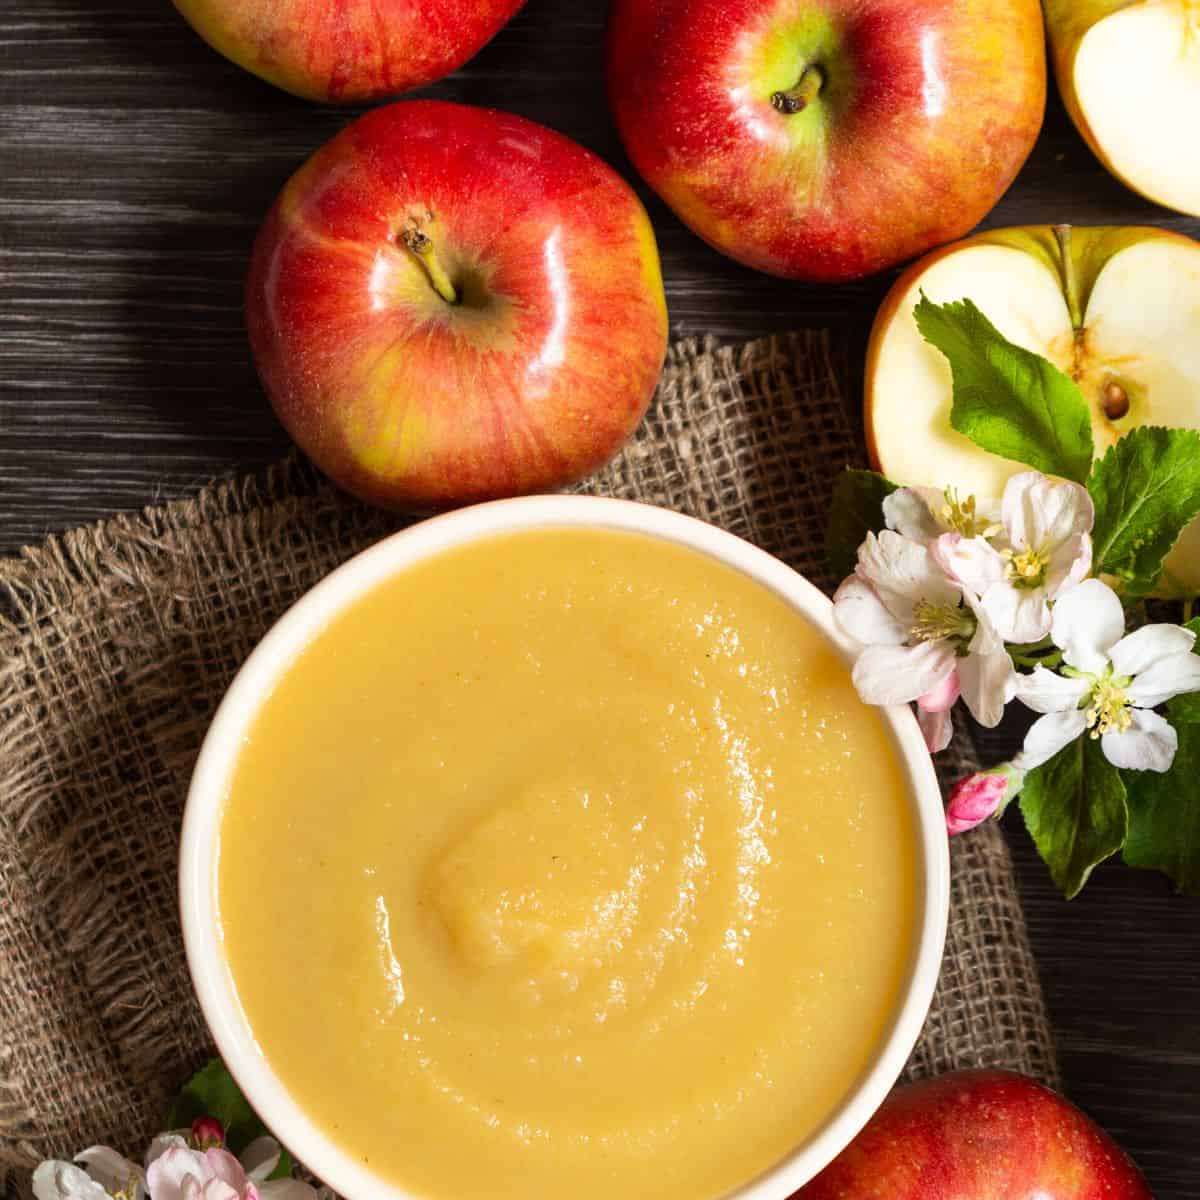 Up close look at a bowl of applesauce with apples surrounding.